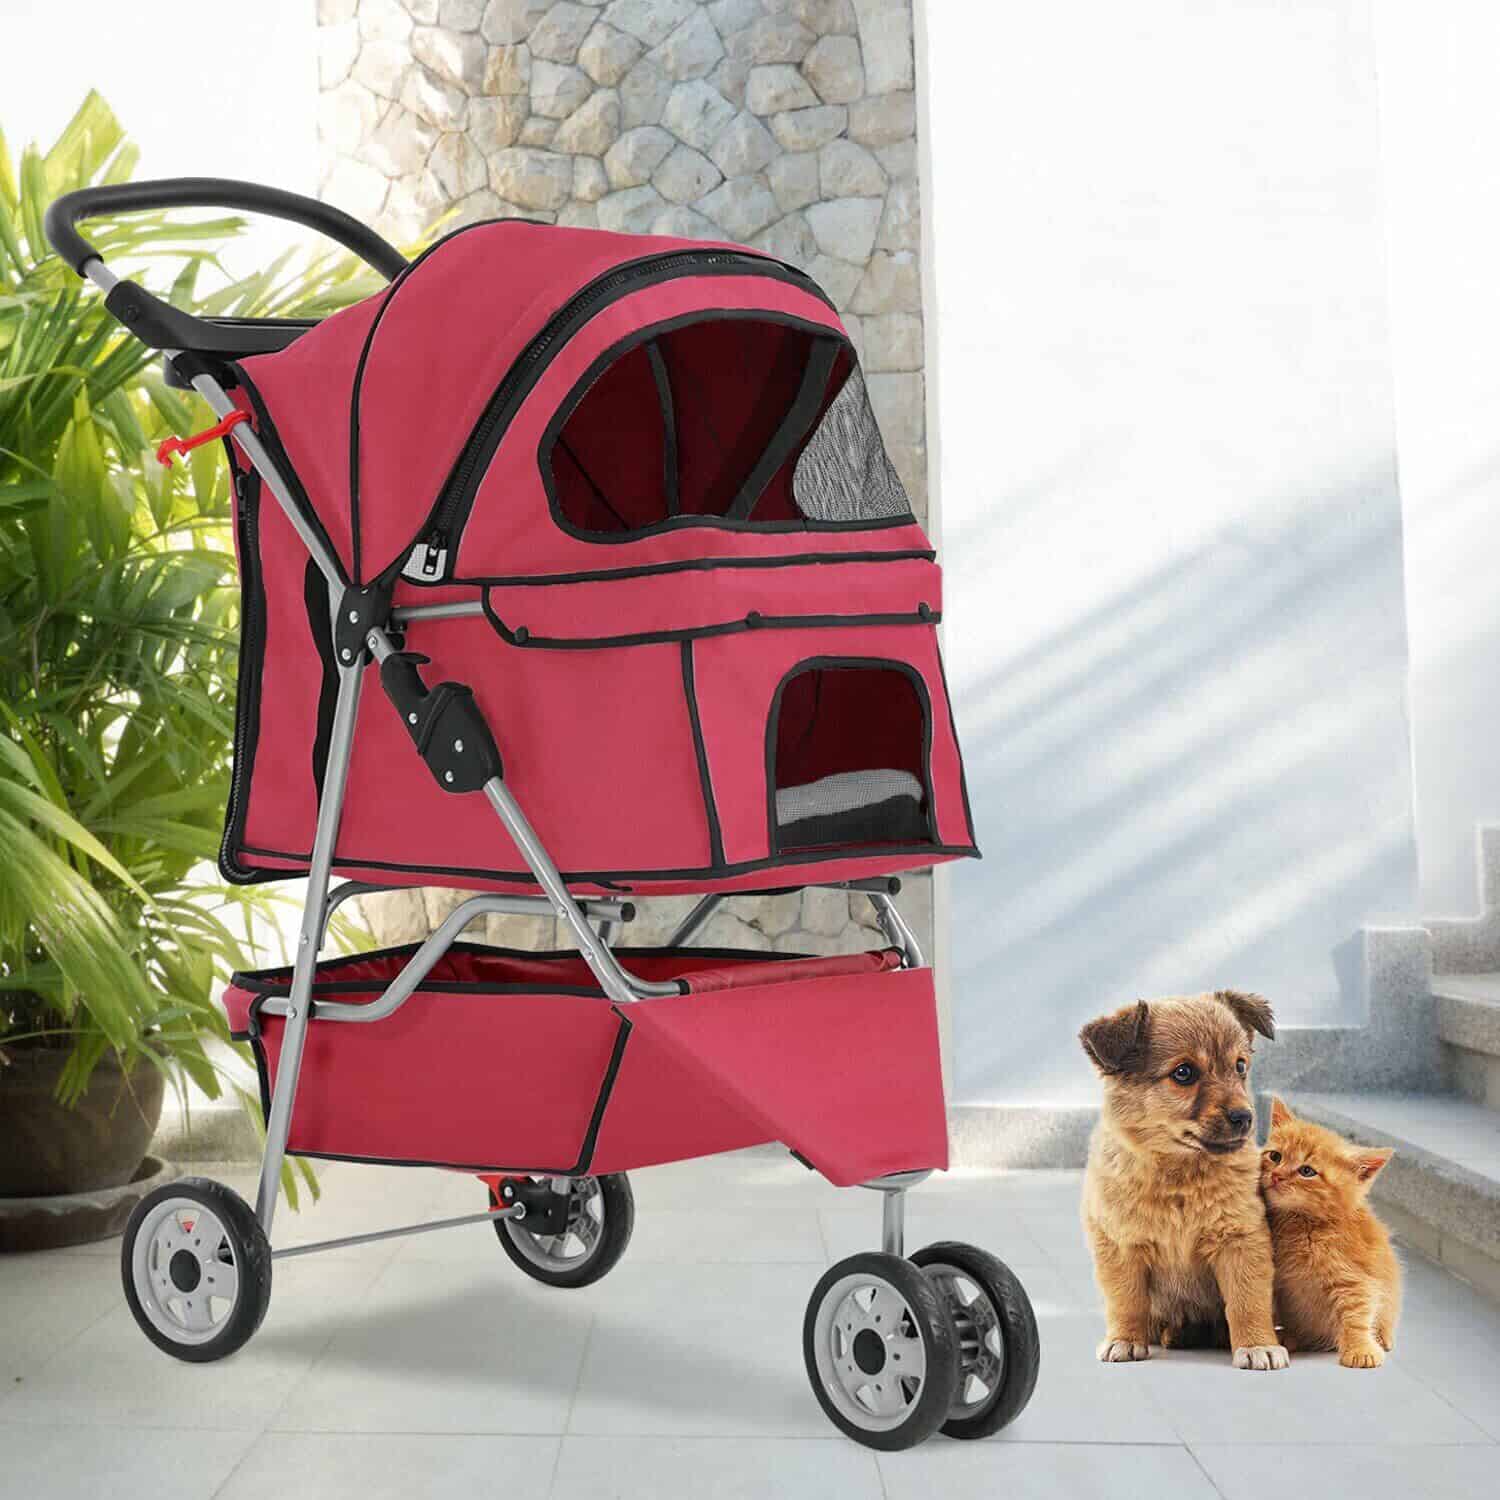 A red pet stroller with a cat in it.